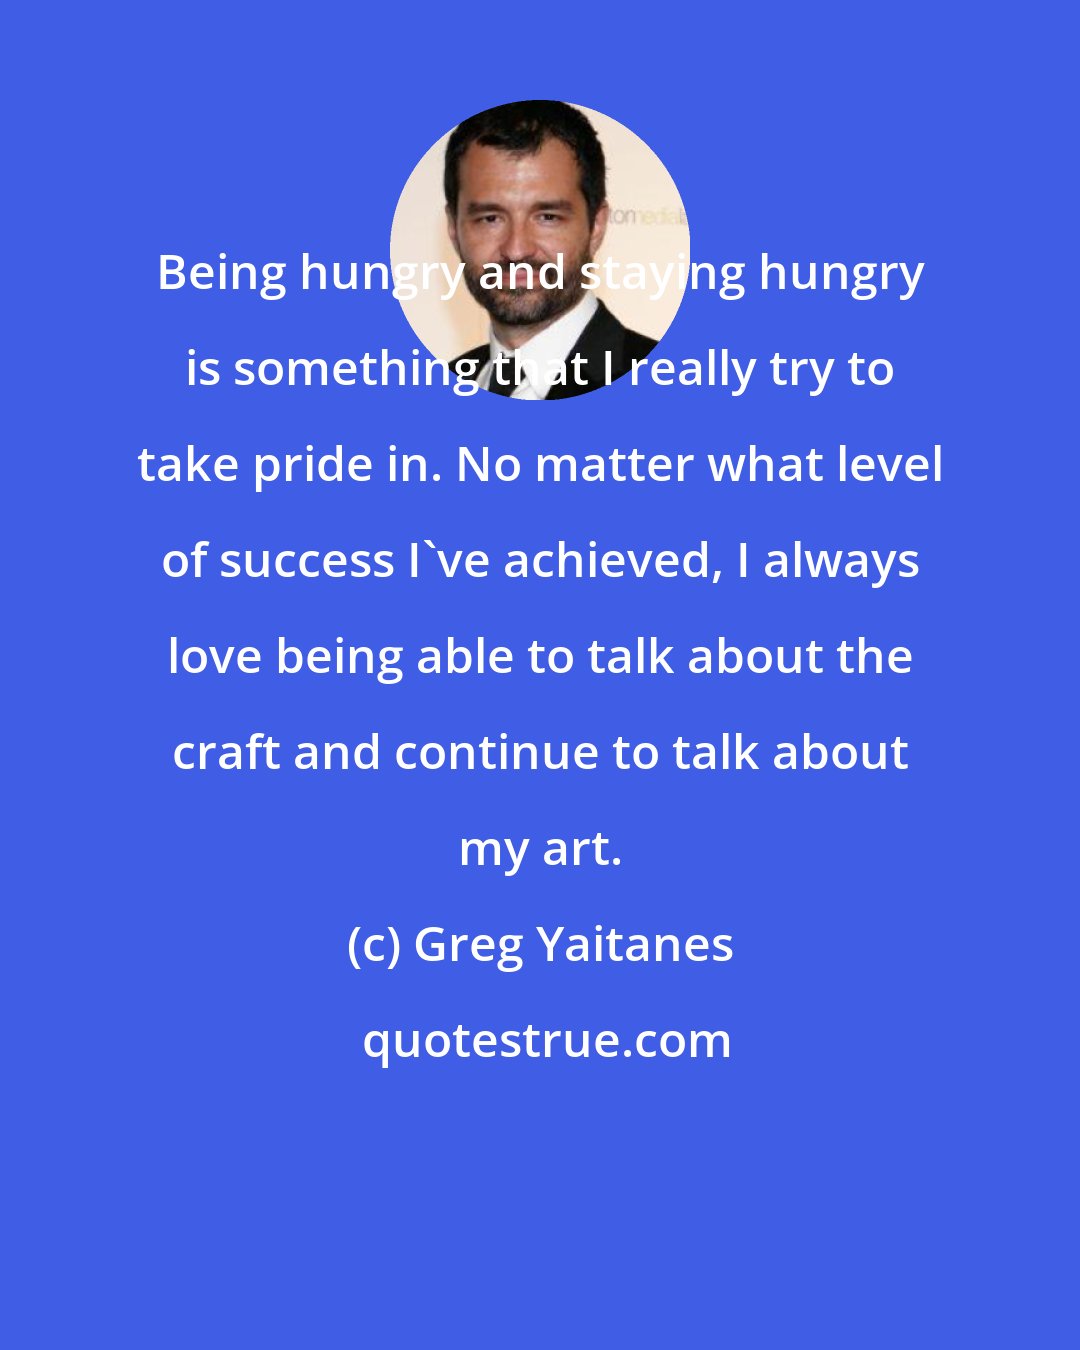 Greg Yaitanes: Being hungry and staying hungry is something that I really try to take pride in. No matter what level of success I've achieved, I always love being able to talk about the craft and continue to talk about my art.